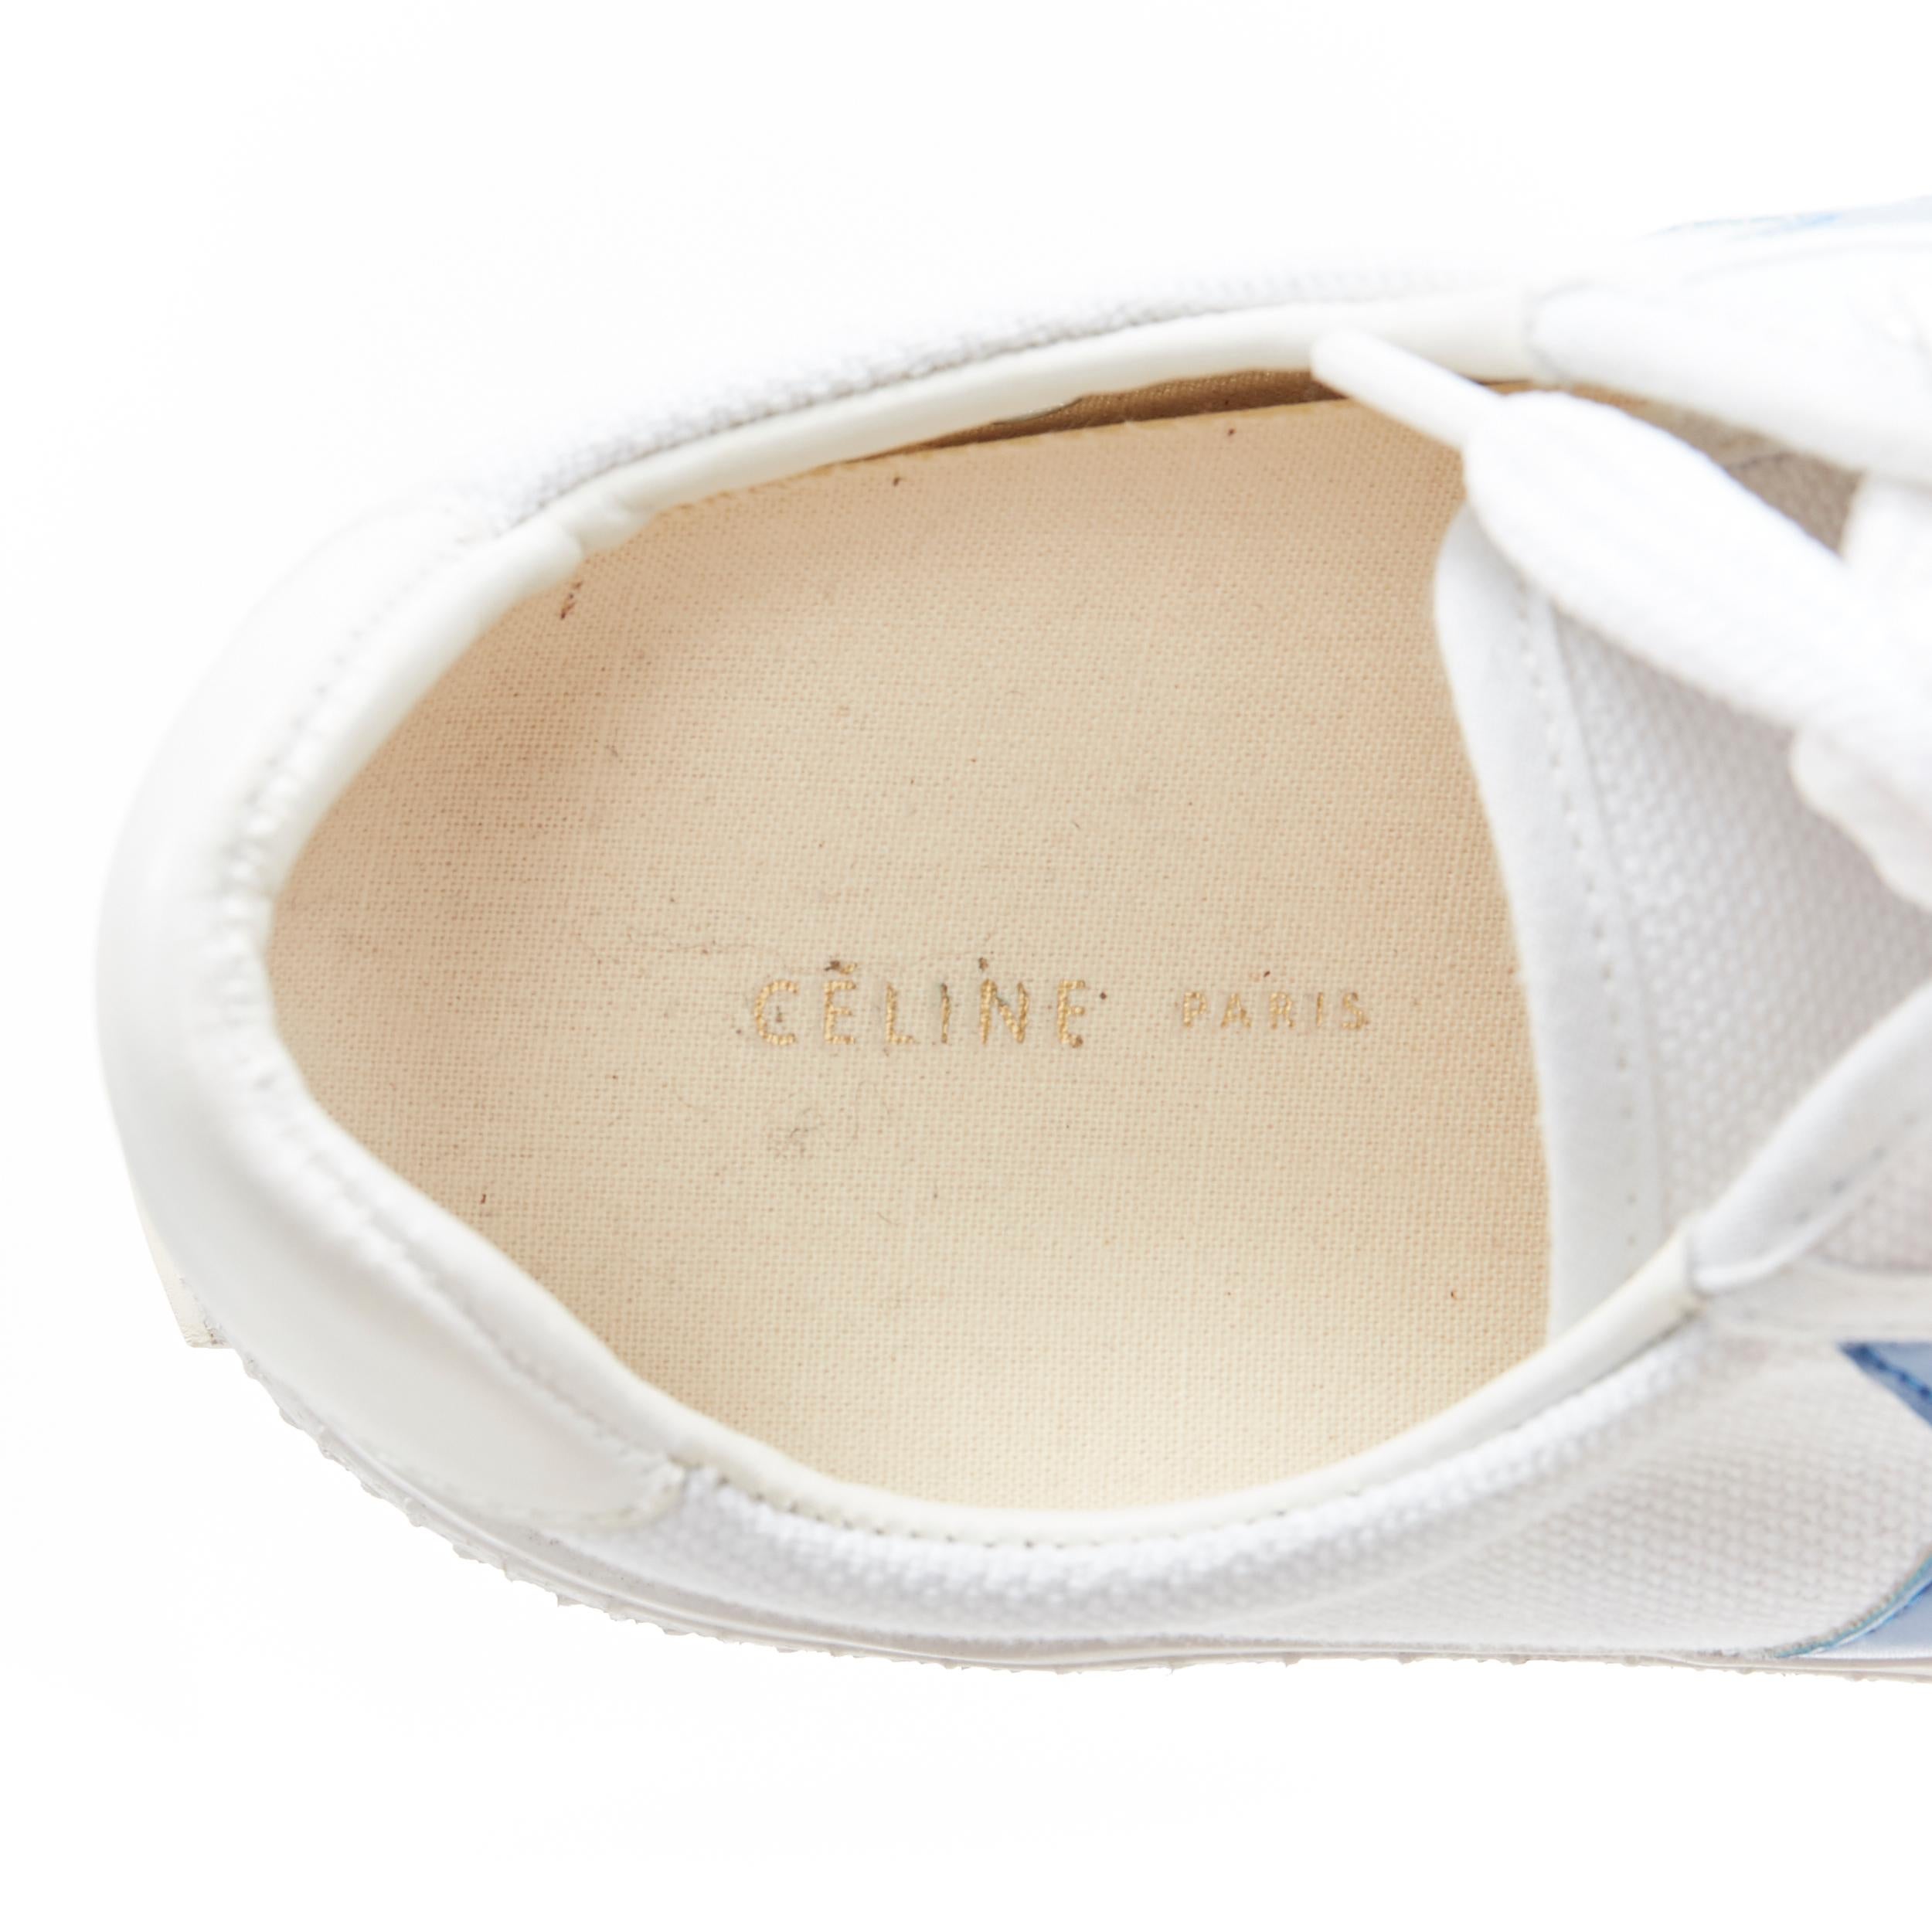 OLD CELINE white blue graphic canvas lace up casusal low top sneakers EU38 4